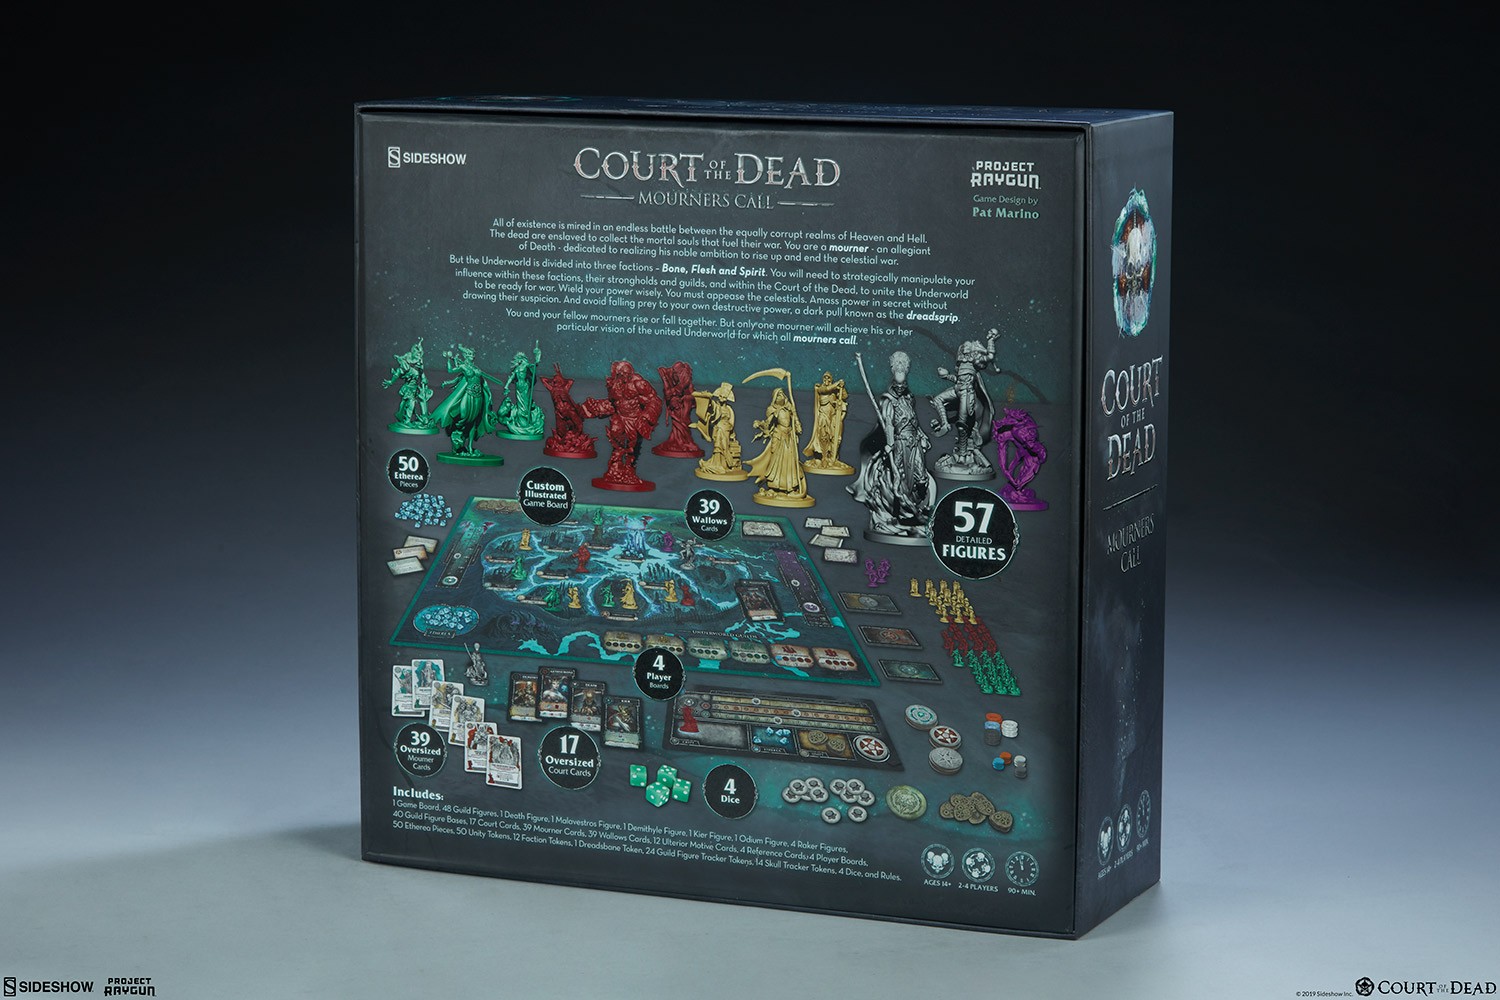 Court of the Dead Mourner's Call Game Collector Edition (Prototype Shown) View 2